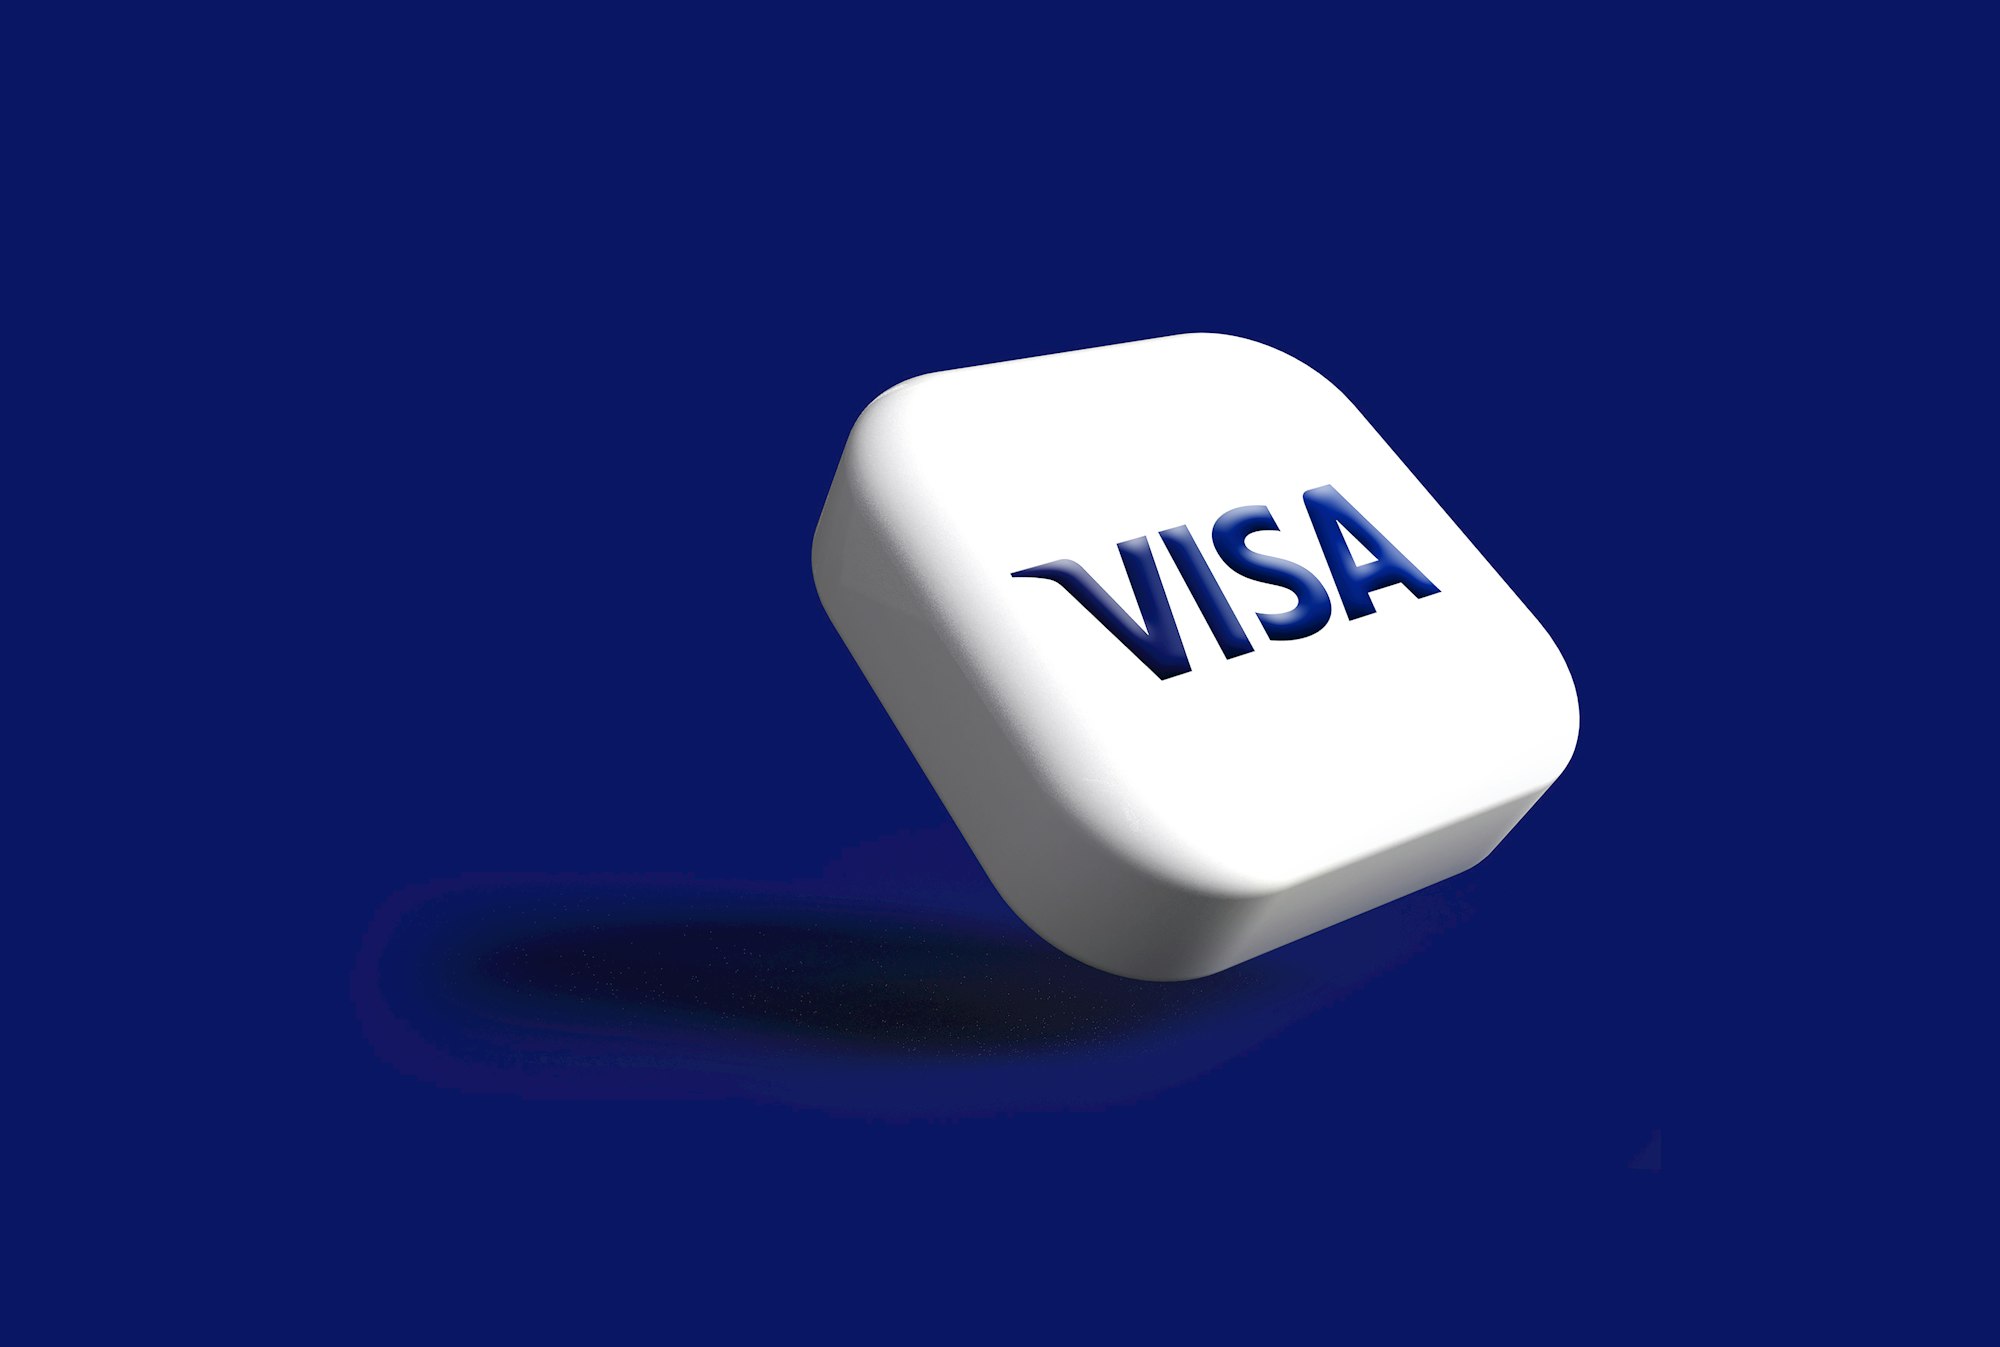 Visa is betting $100 million to invest in Generative AI ventures